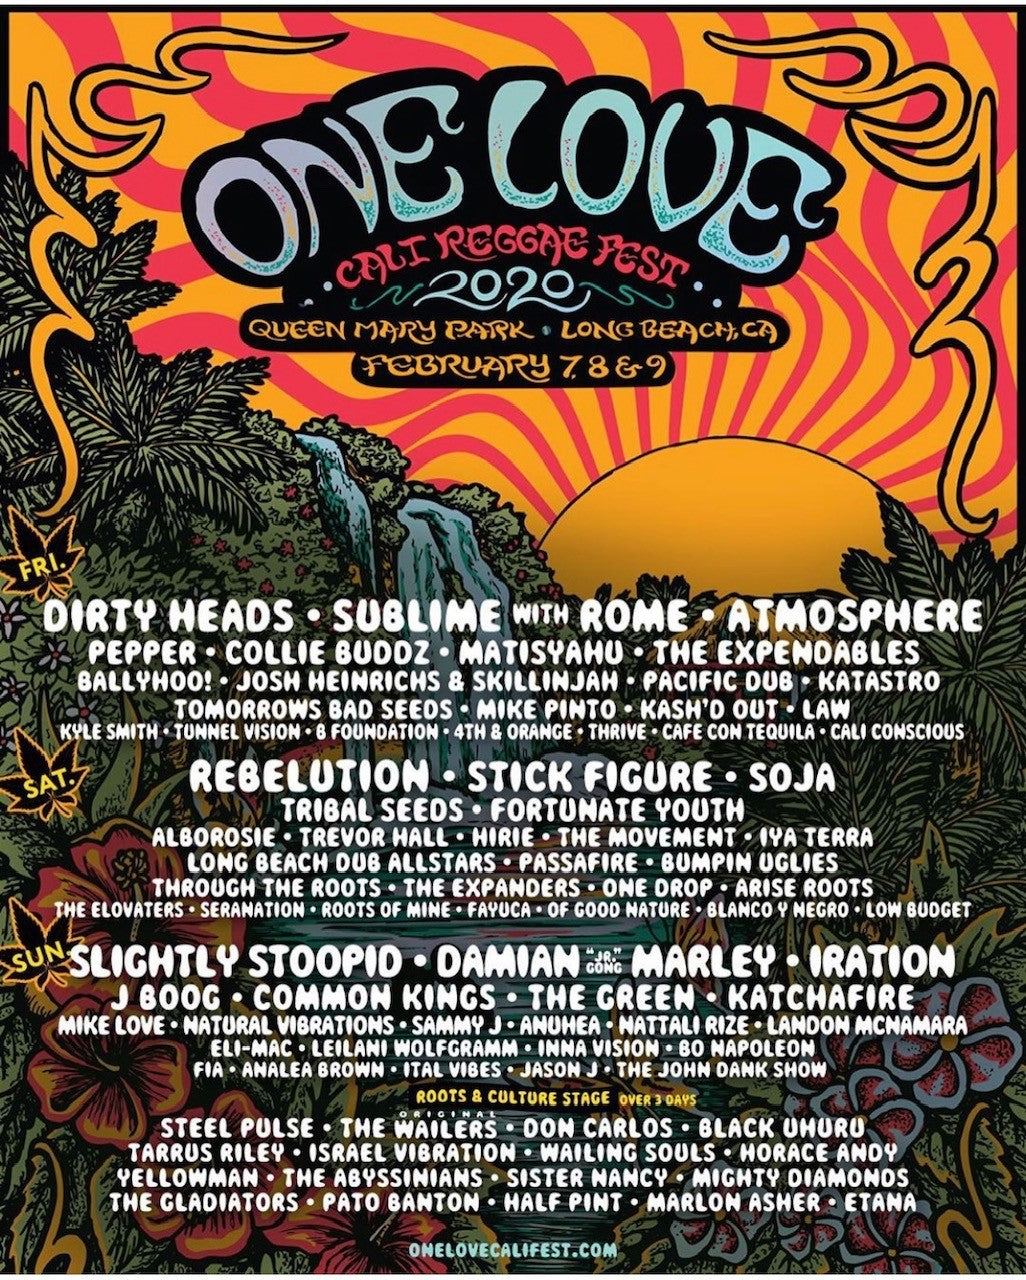 Win Tickets for One Love Cali Fest 2020